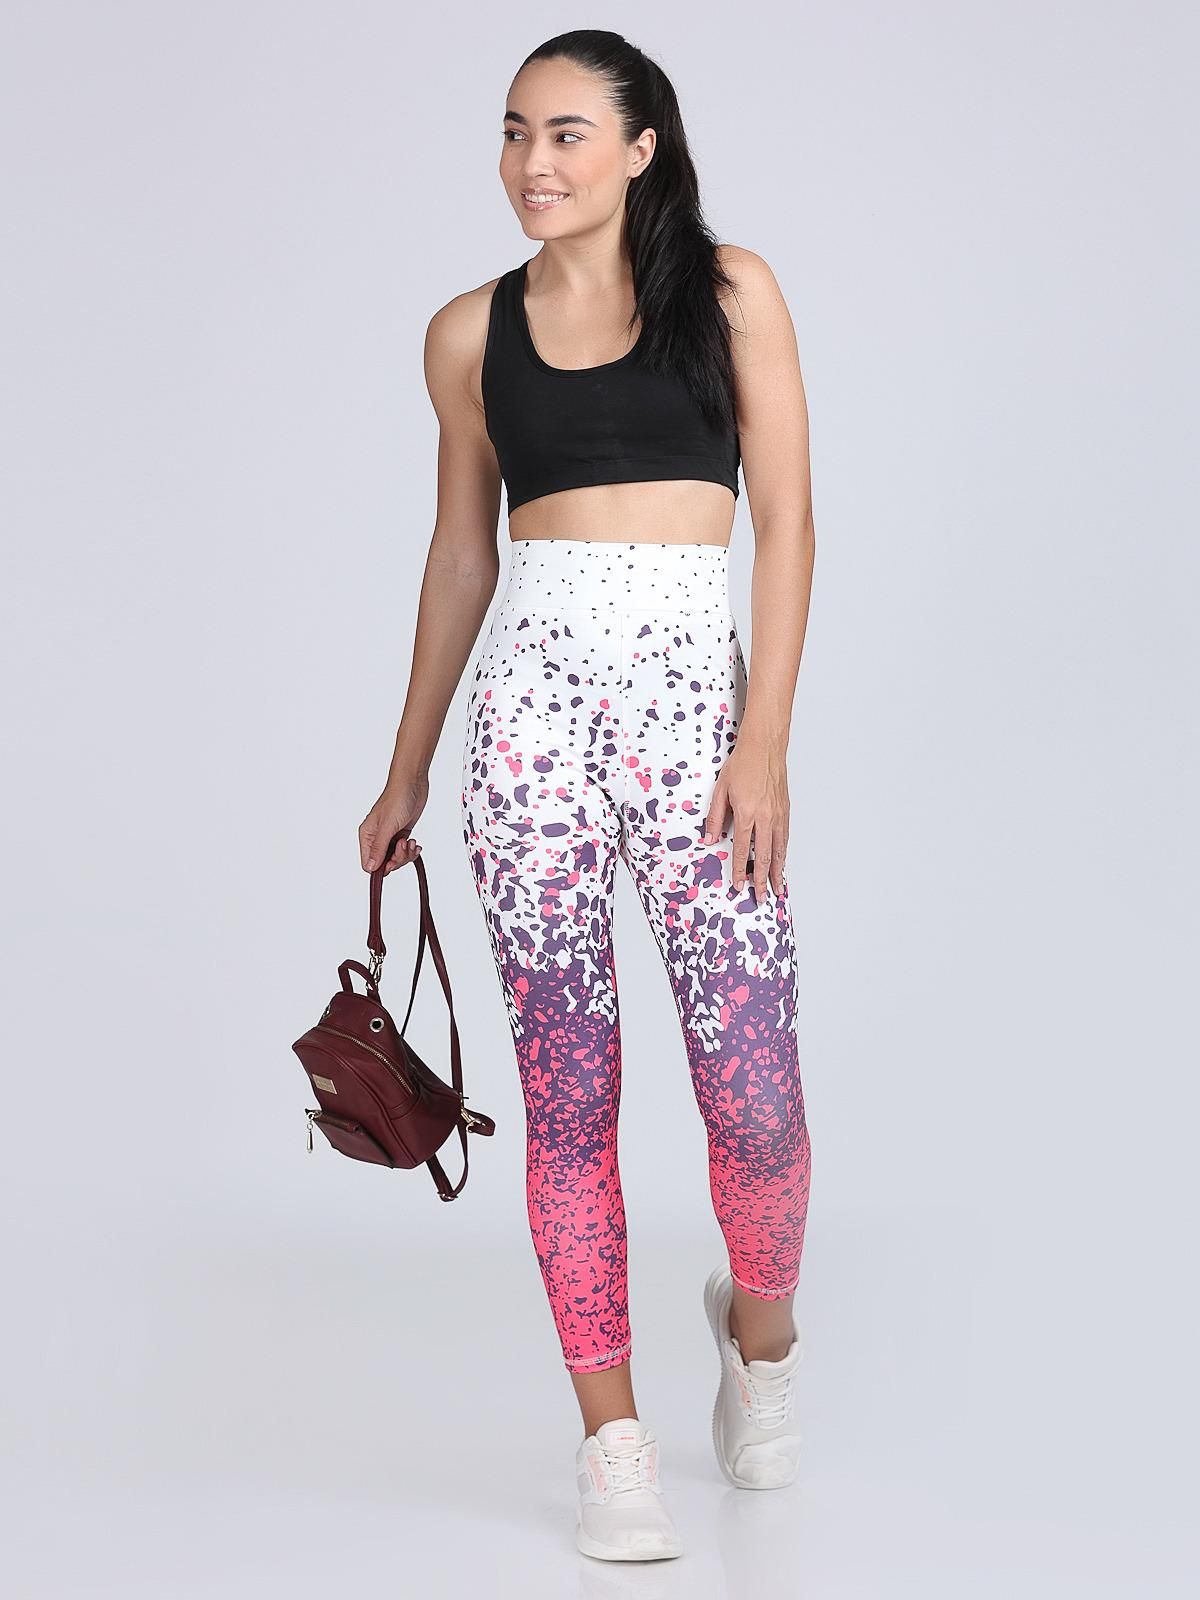 The model in the image is wearing BlossomFit Leggings from Alice Milan. Crafted with the finest materials and impeccable attention to detail, the Leggings looks premium, trendy, luxurious and offers unparalleled comfort. It’s a perfect clothing option for loungewear, resort wear, party wear or for an airport look. The woman in the image looks happy, and confident with her style statement putting a happy smile on her face.